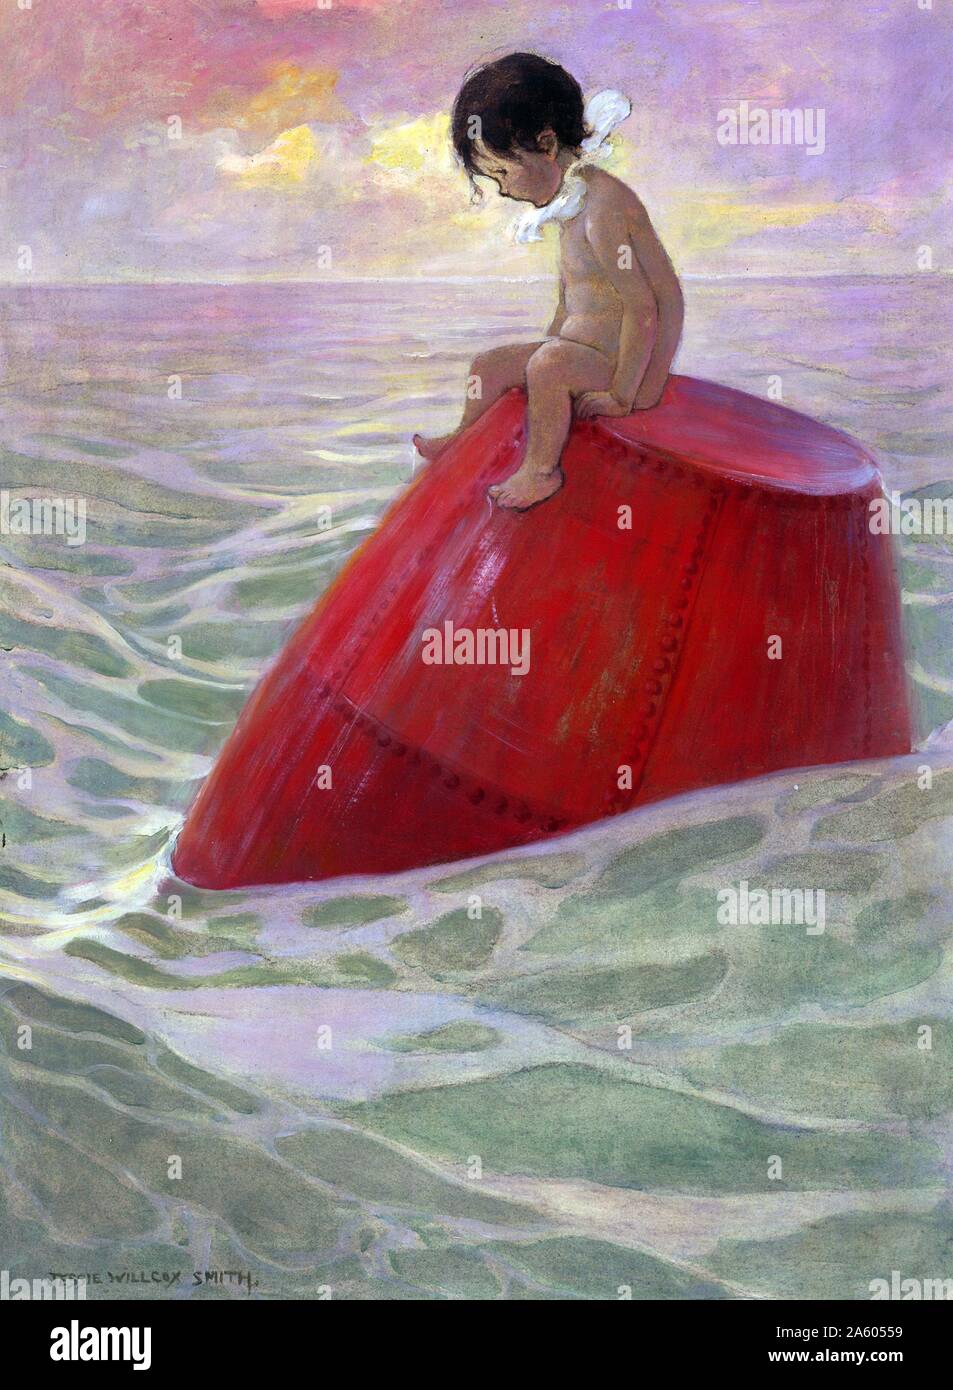 Tom sat upon the buoy long days by Jessie Wilcox Smith; 1863-1935. illustration from the Water Babies by Charles Kingsley. New York : Dodd; Mead & Co.; 1916 Stock Photo